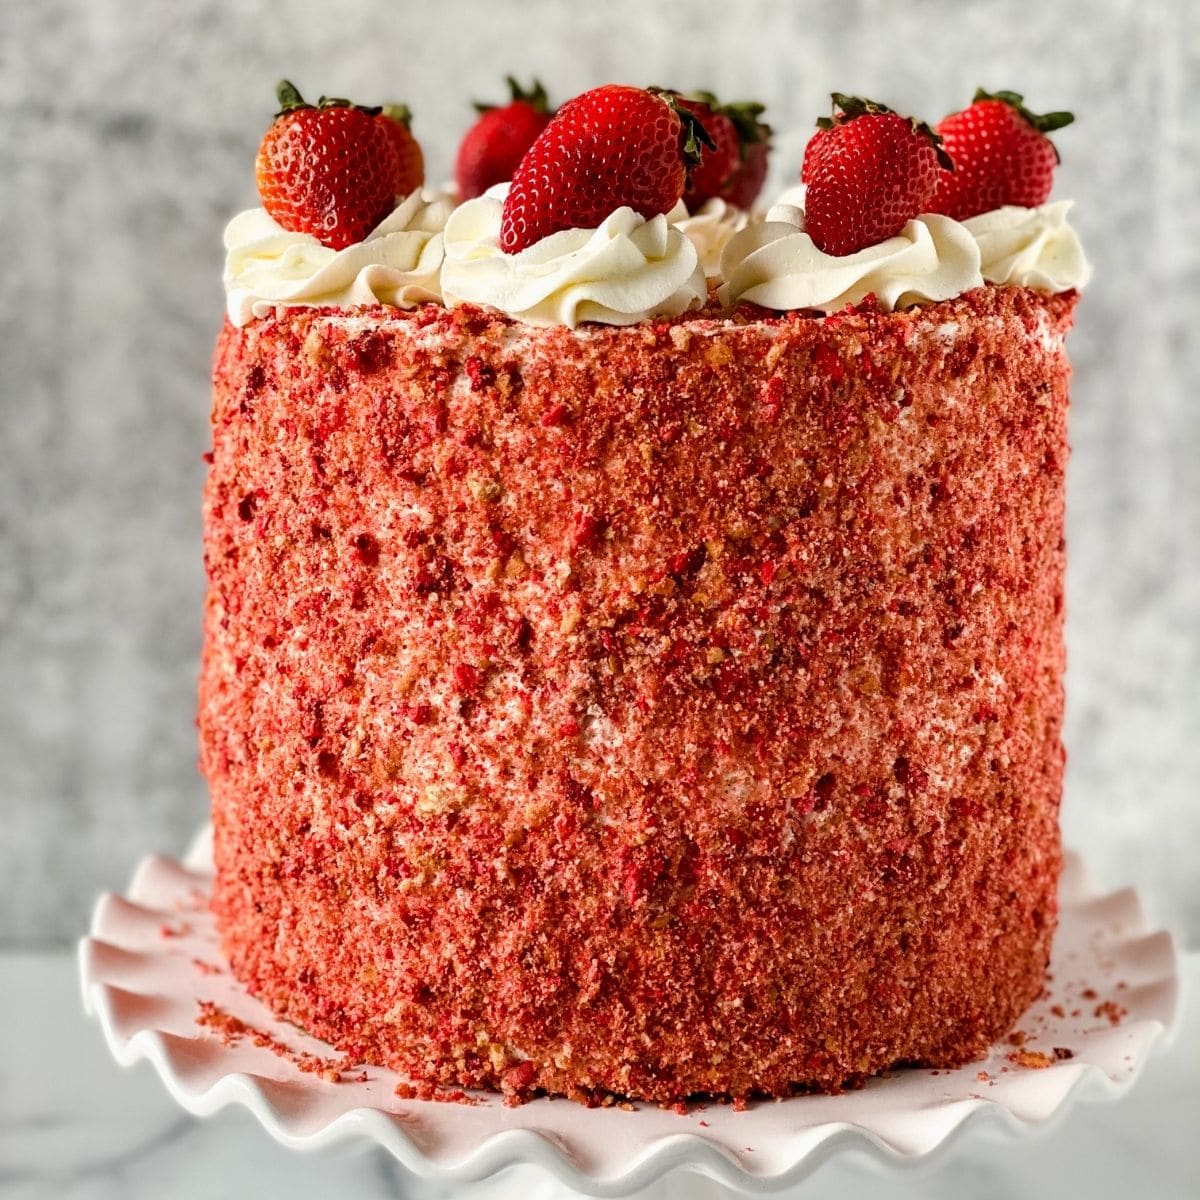 Cake with strawberries on top and gray background